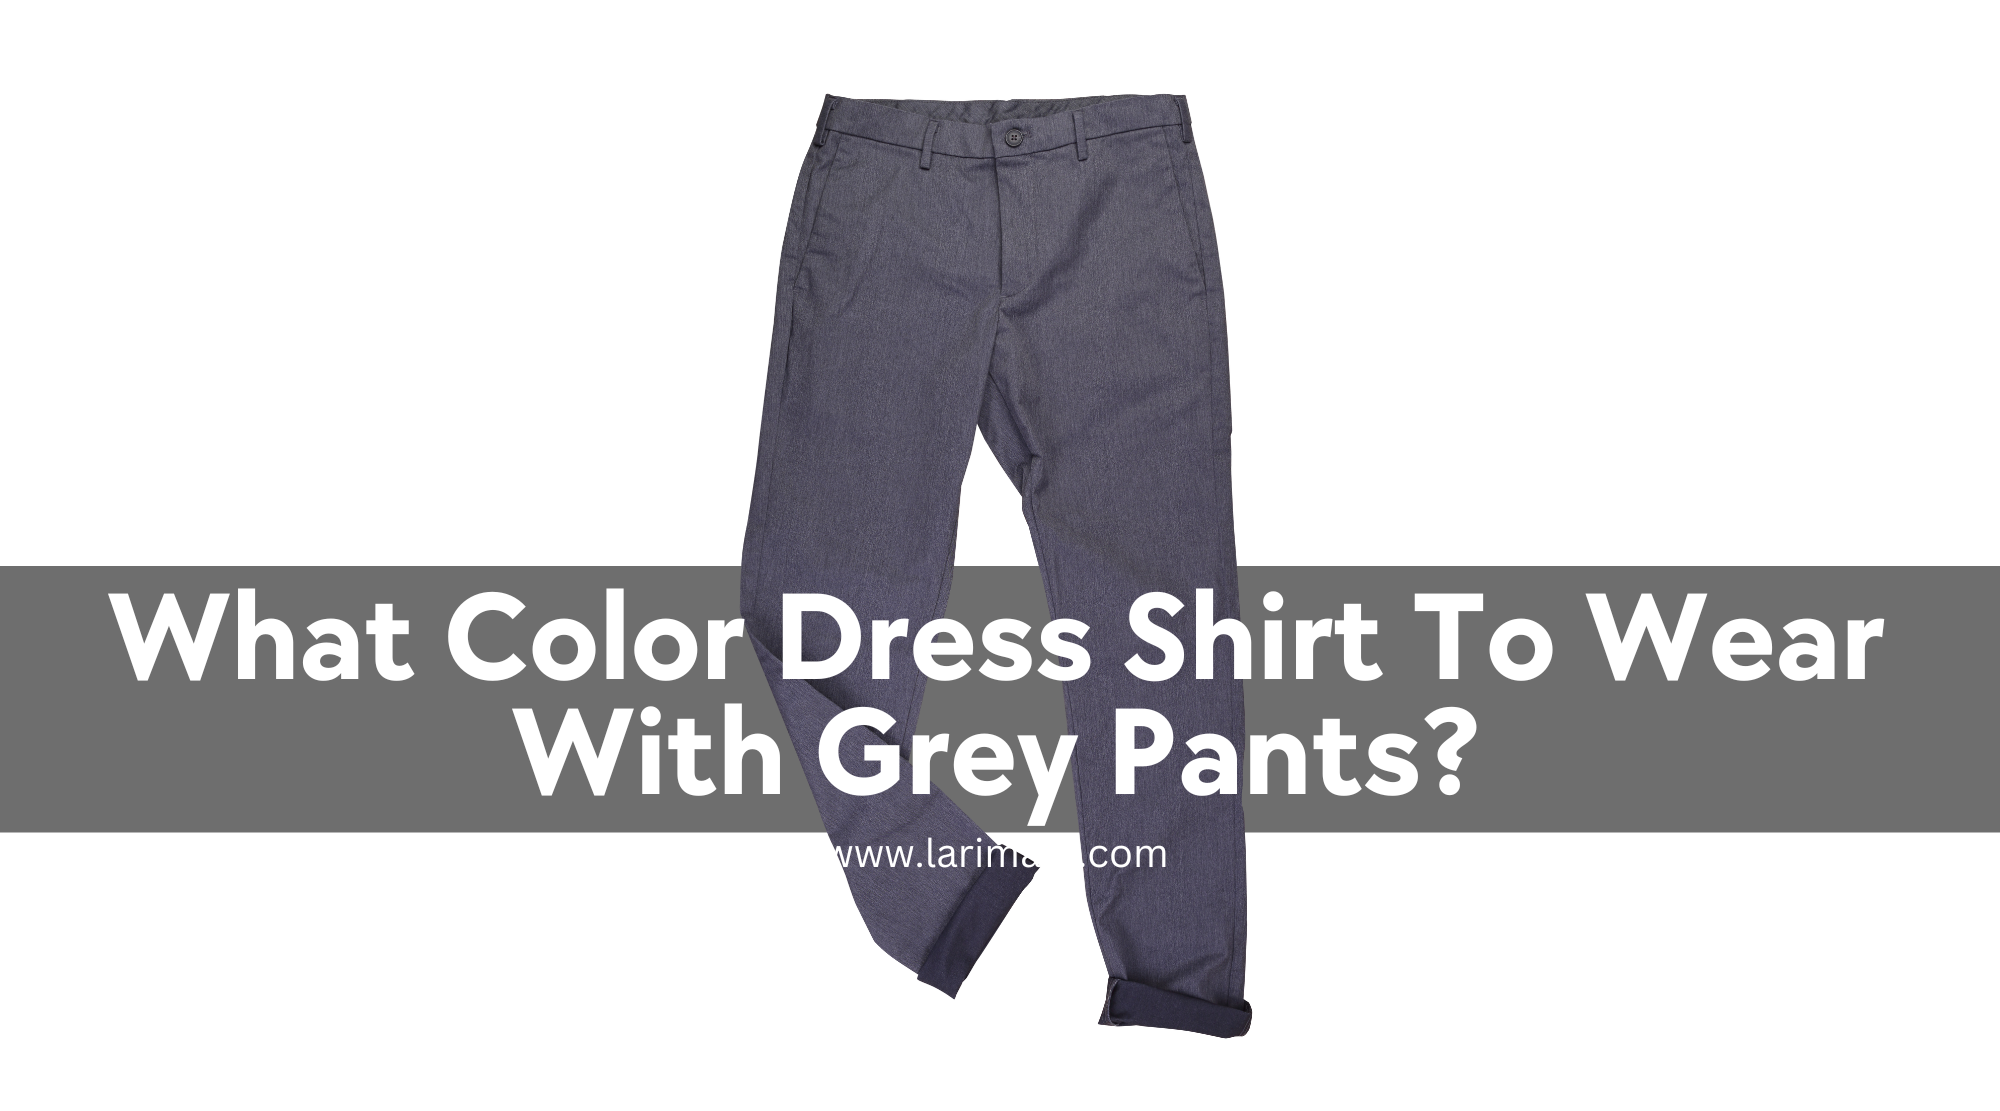 What Color Dress Shirt To Wear With Grey Pants?